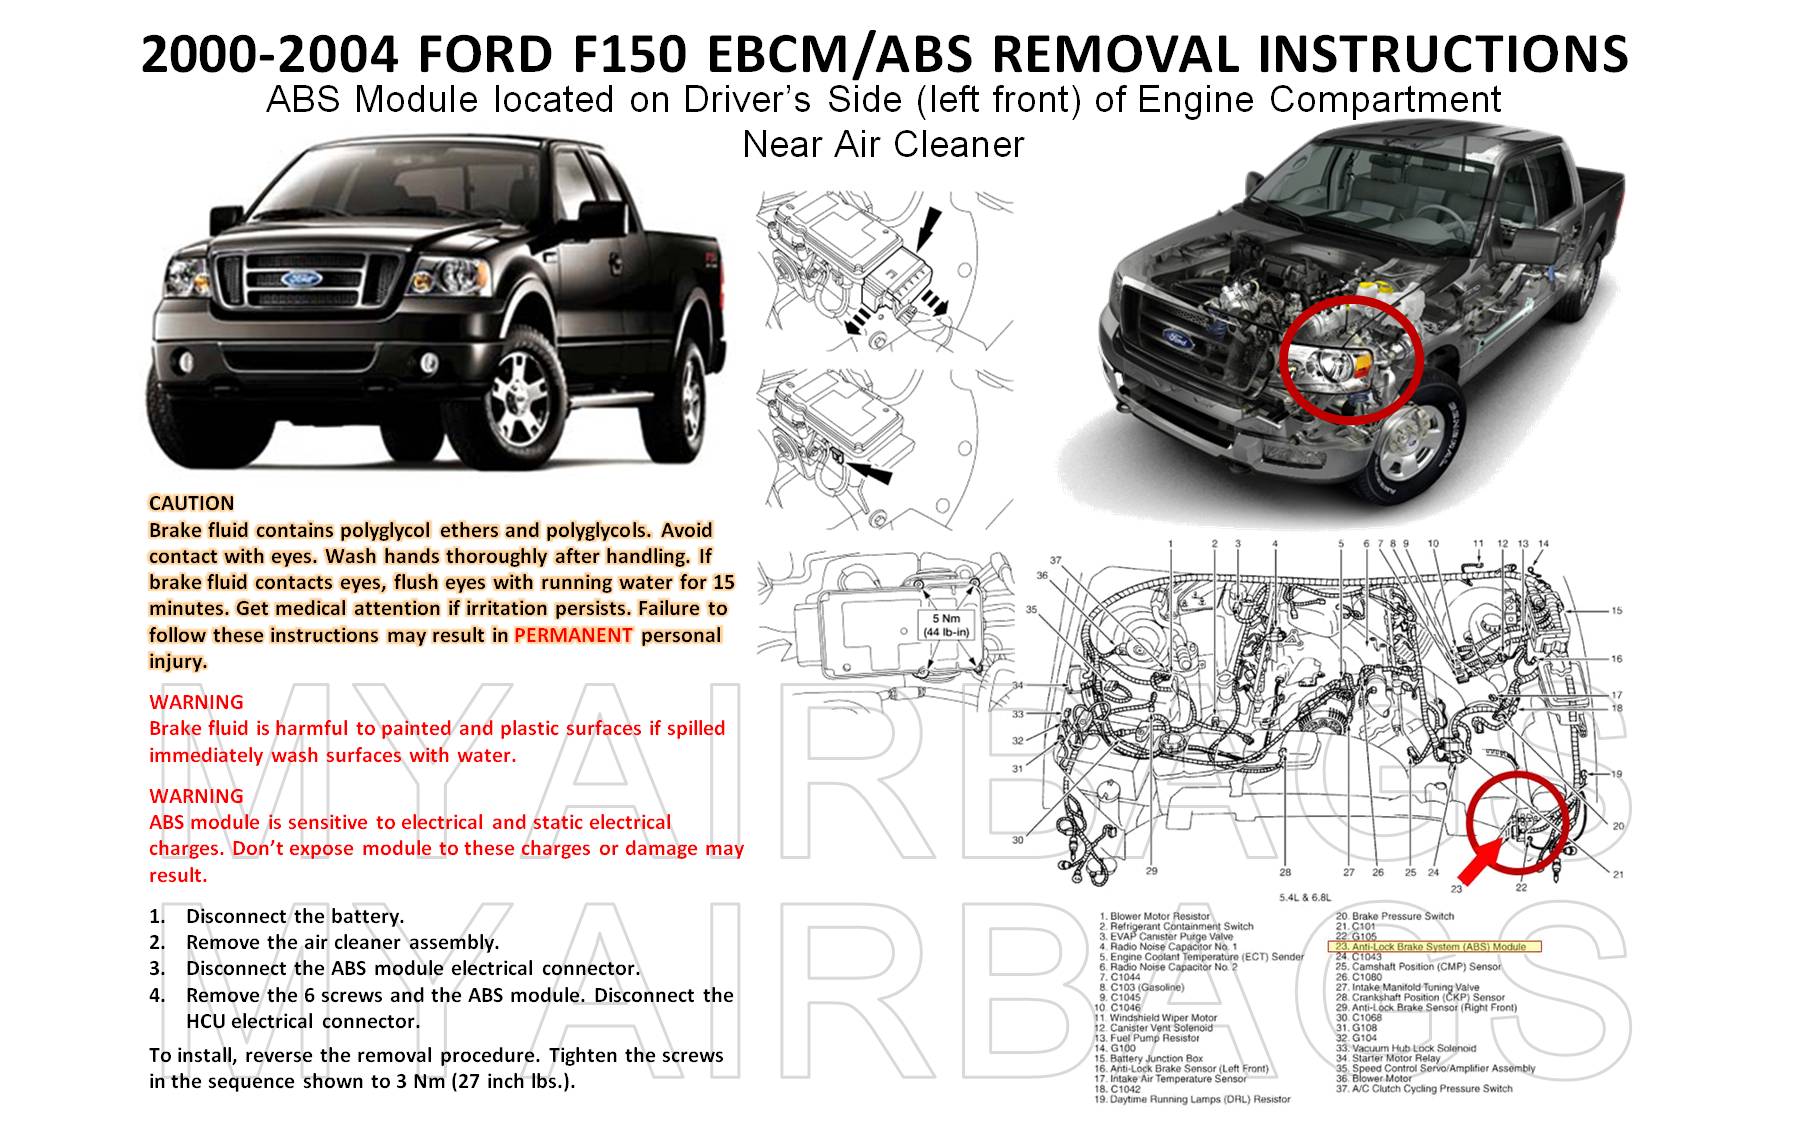 Ford f-150 abs module #10